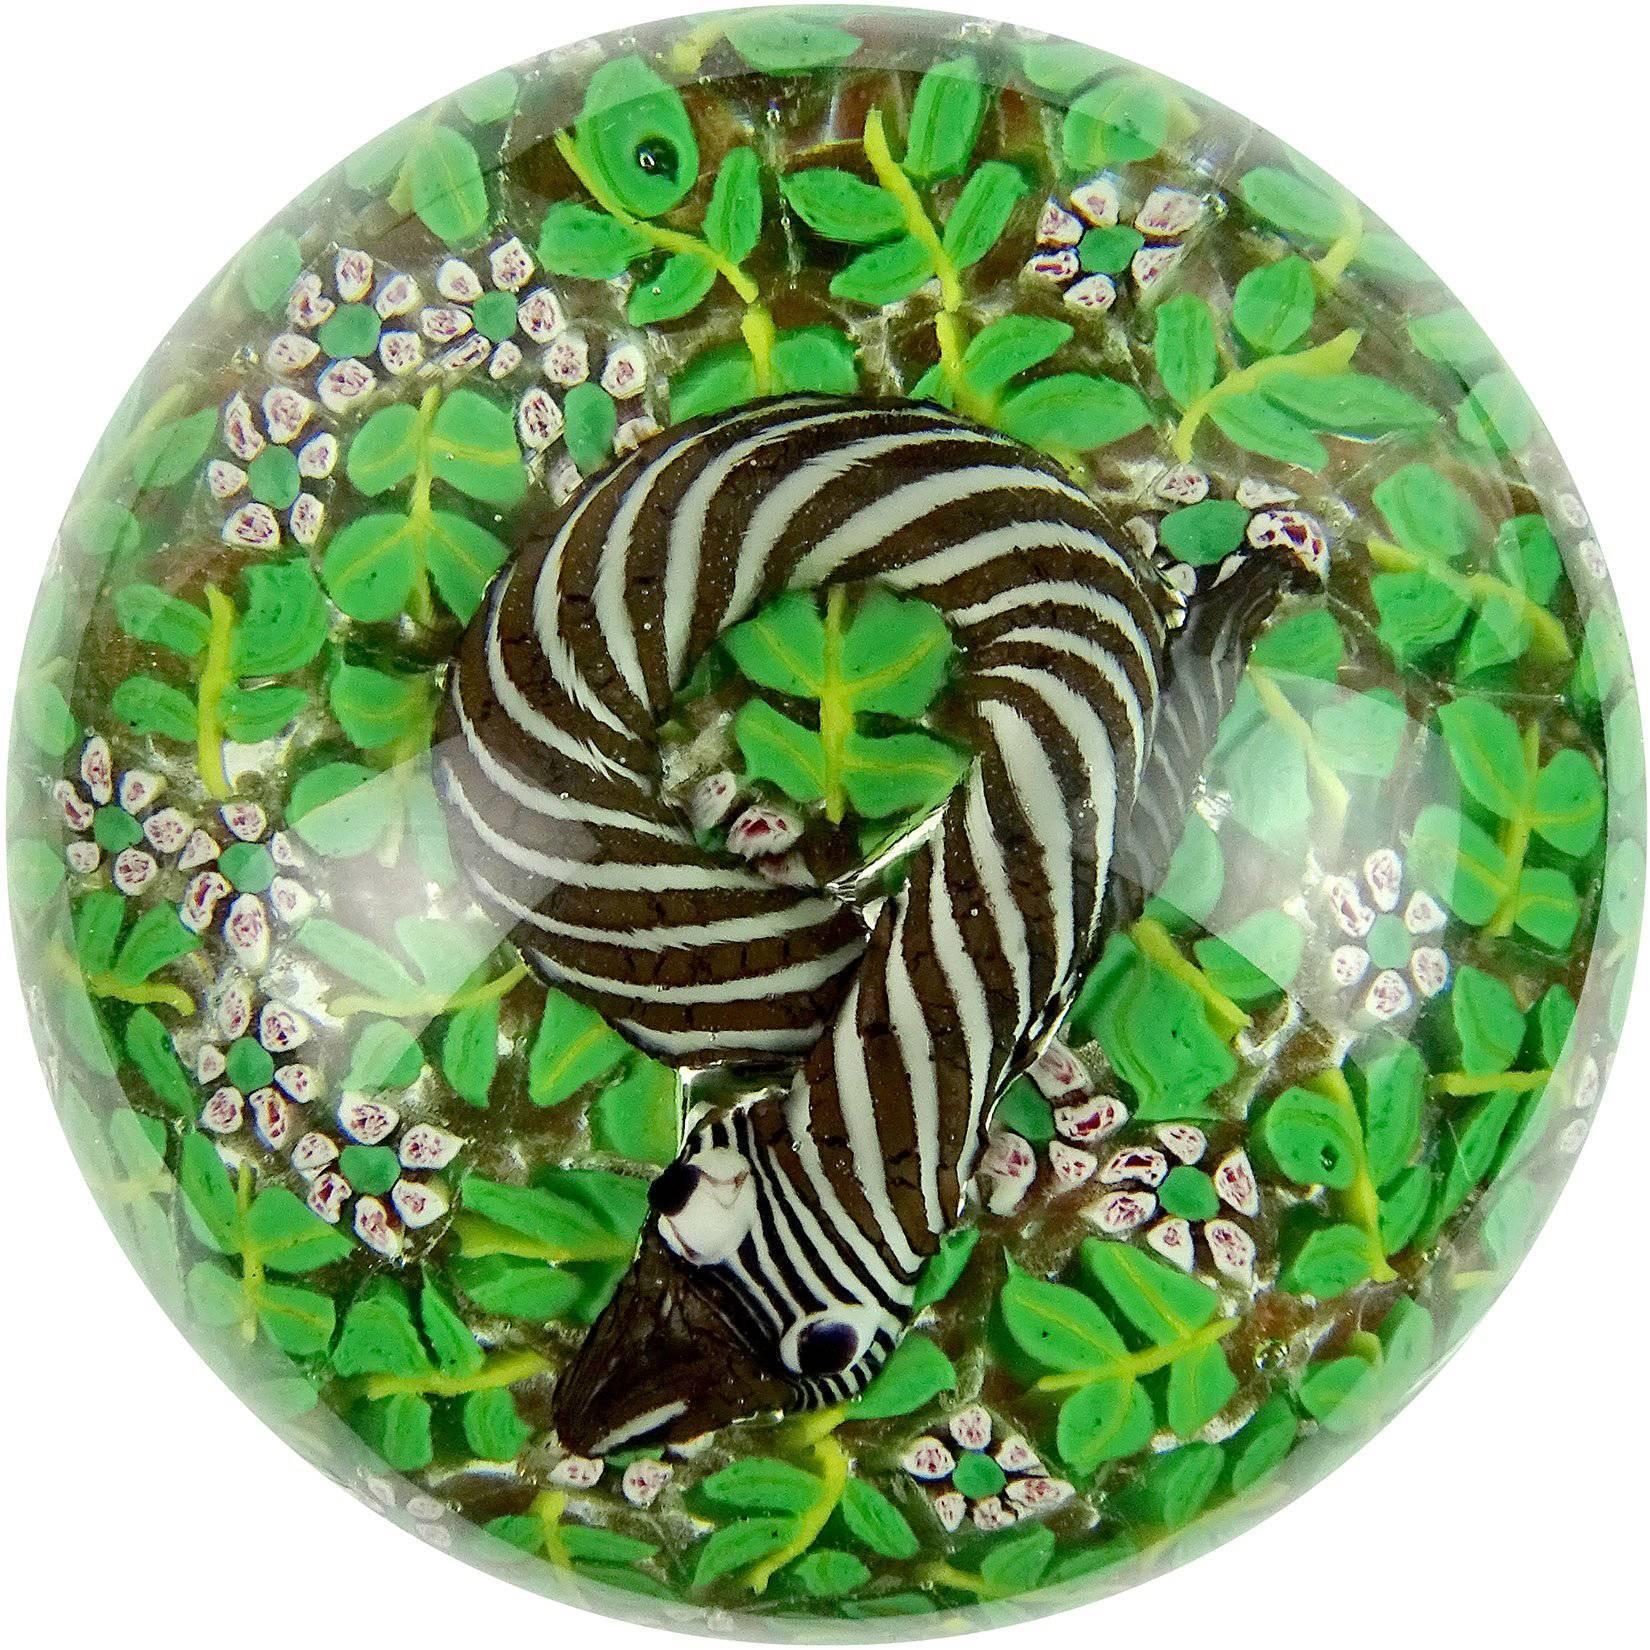 Hand-Crafted Fratelli Toso Murano Striped Snake in Wild Flowers Italian Art Glass Paperweight